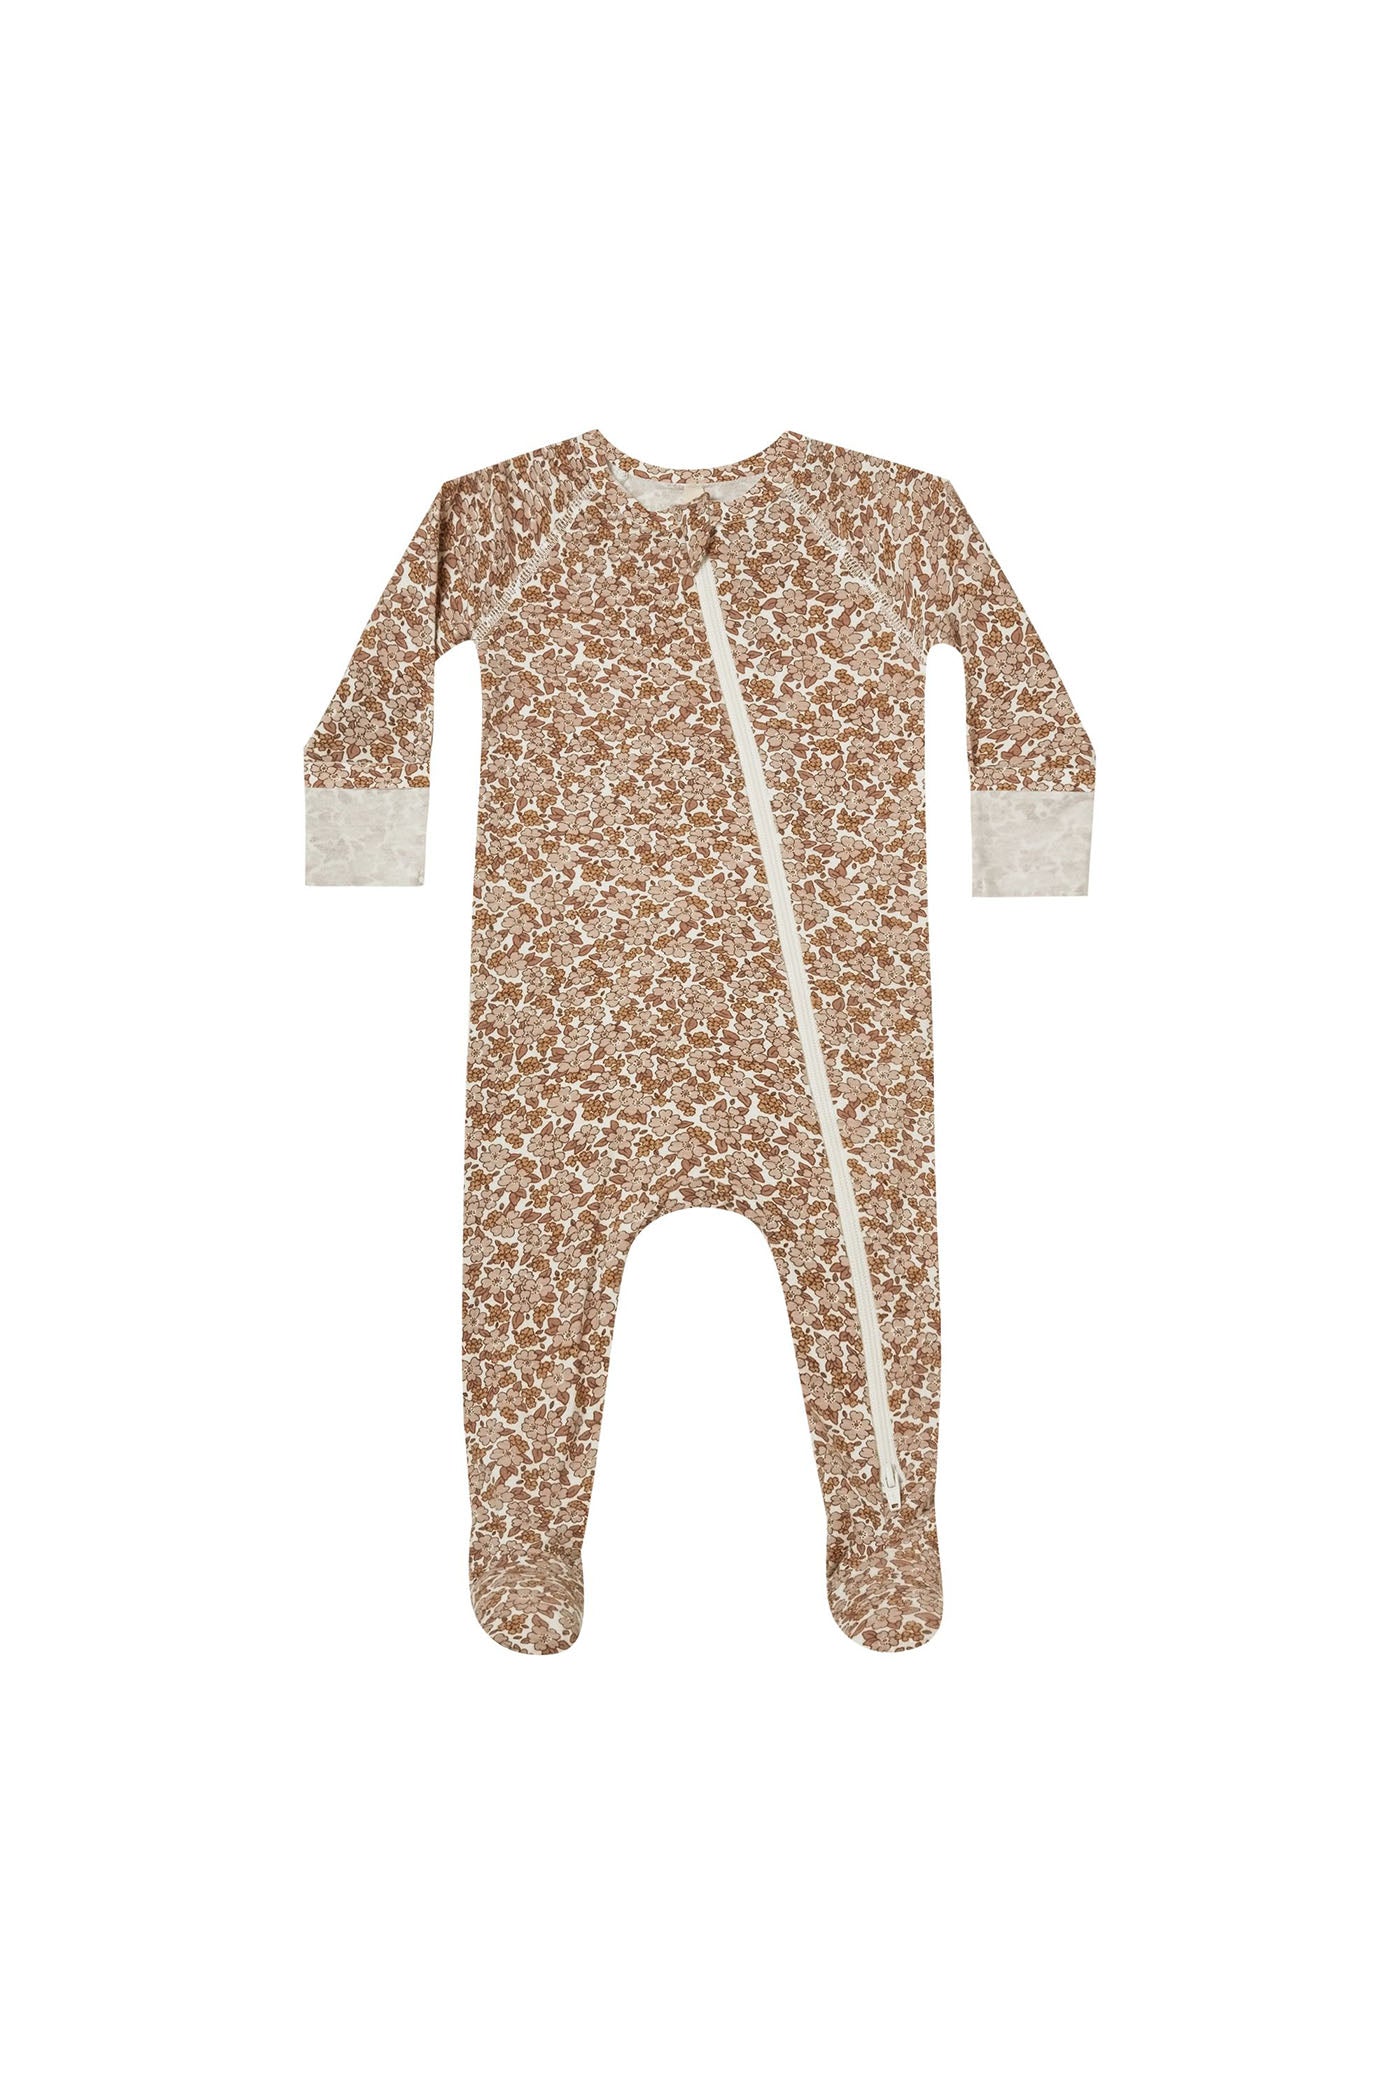 meadow floral Bamboo Zip Footie by Quincy Mae